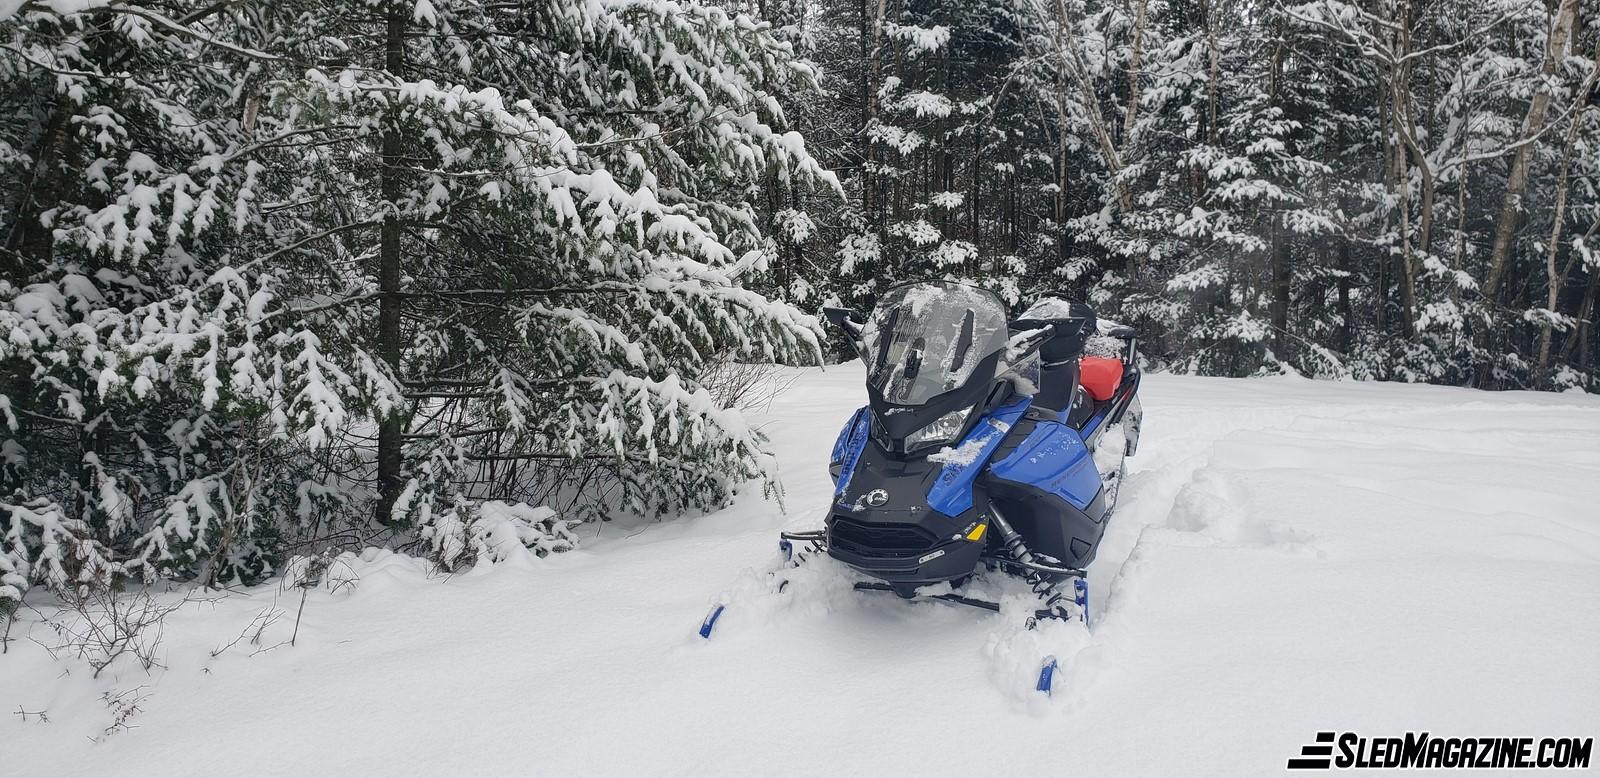 I Never Would Have Thought That… Snowmobile - Snowmobiler